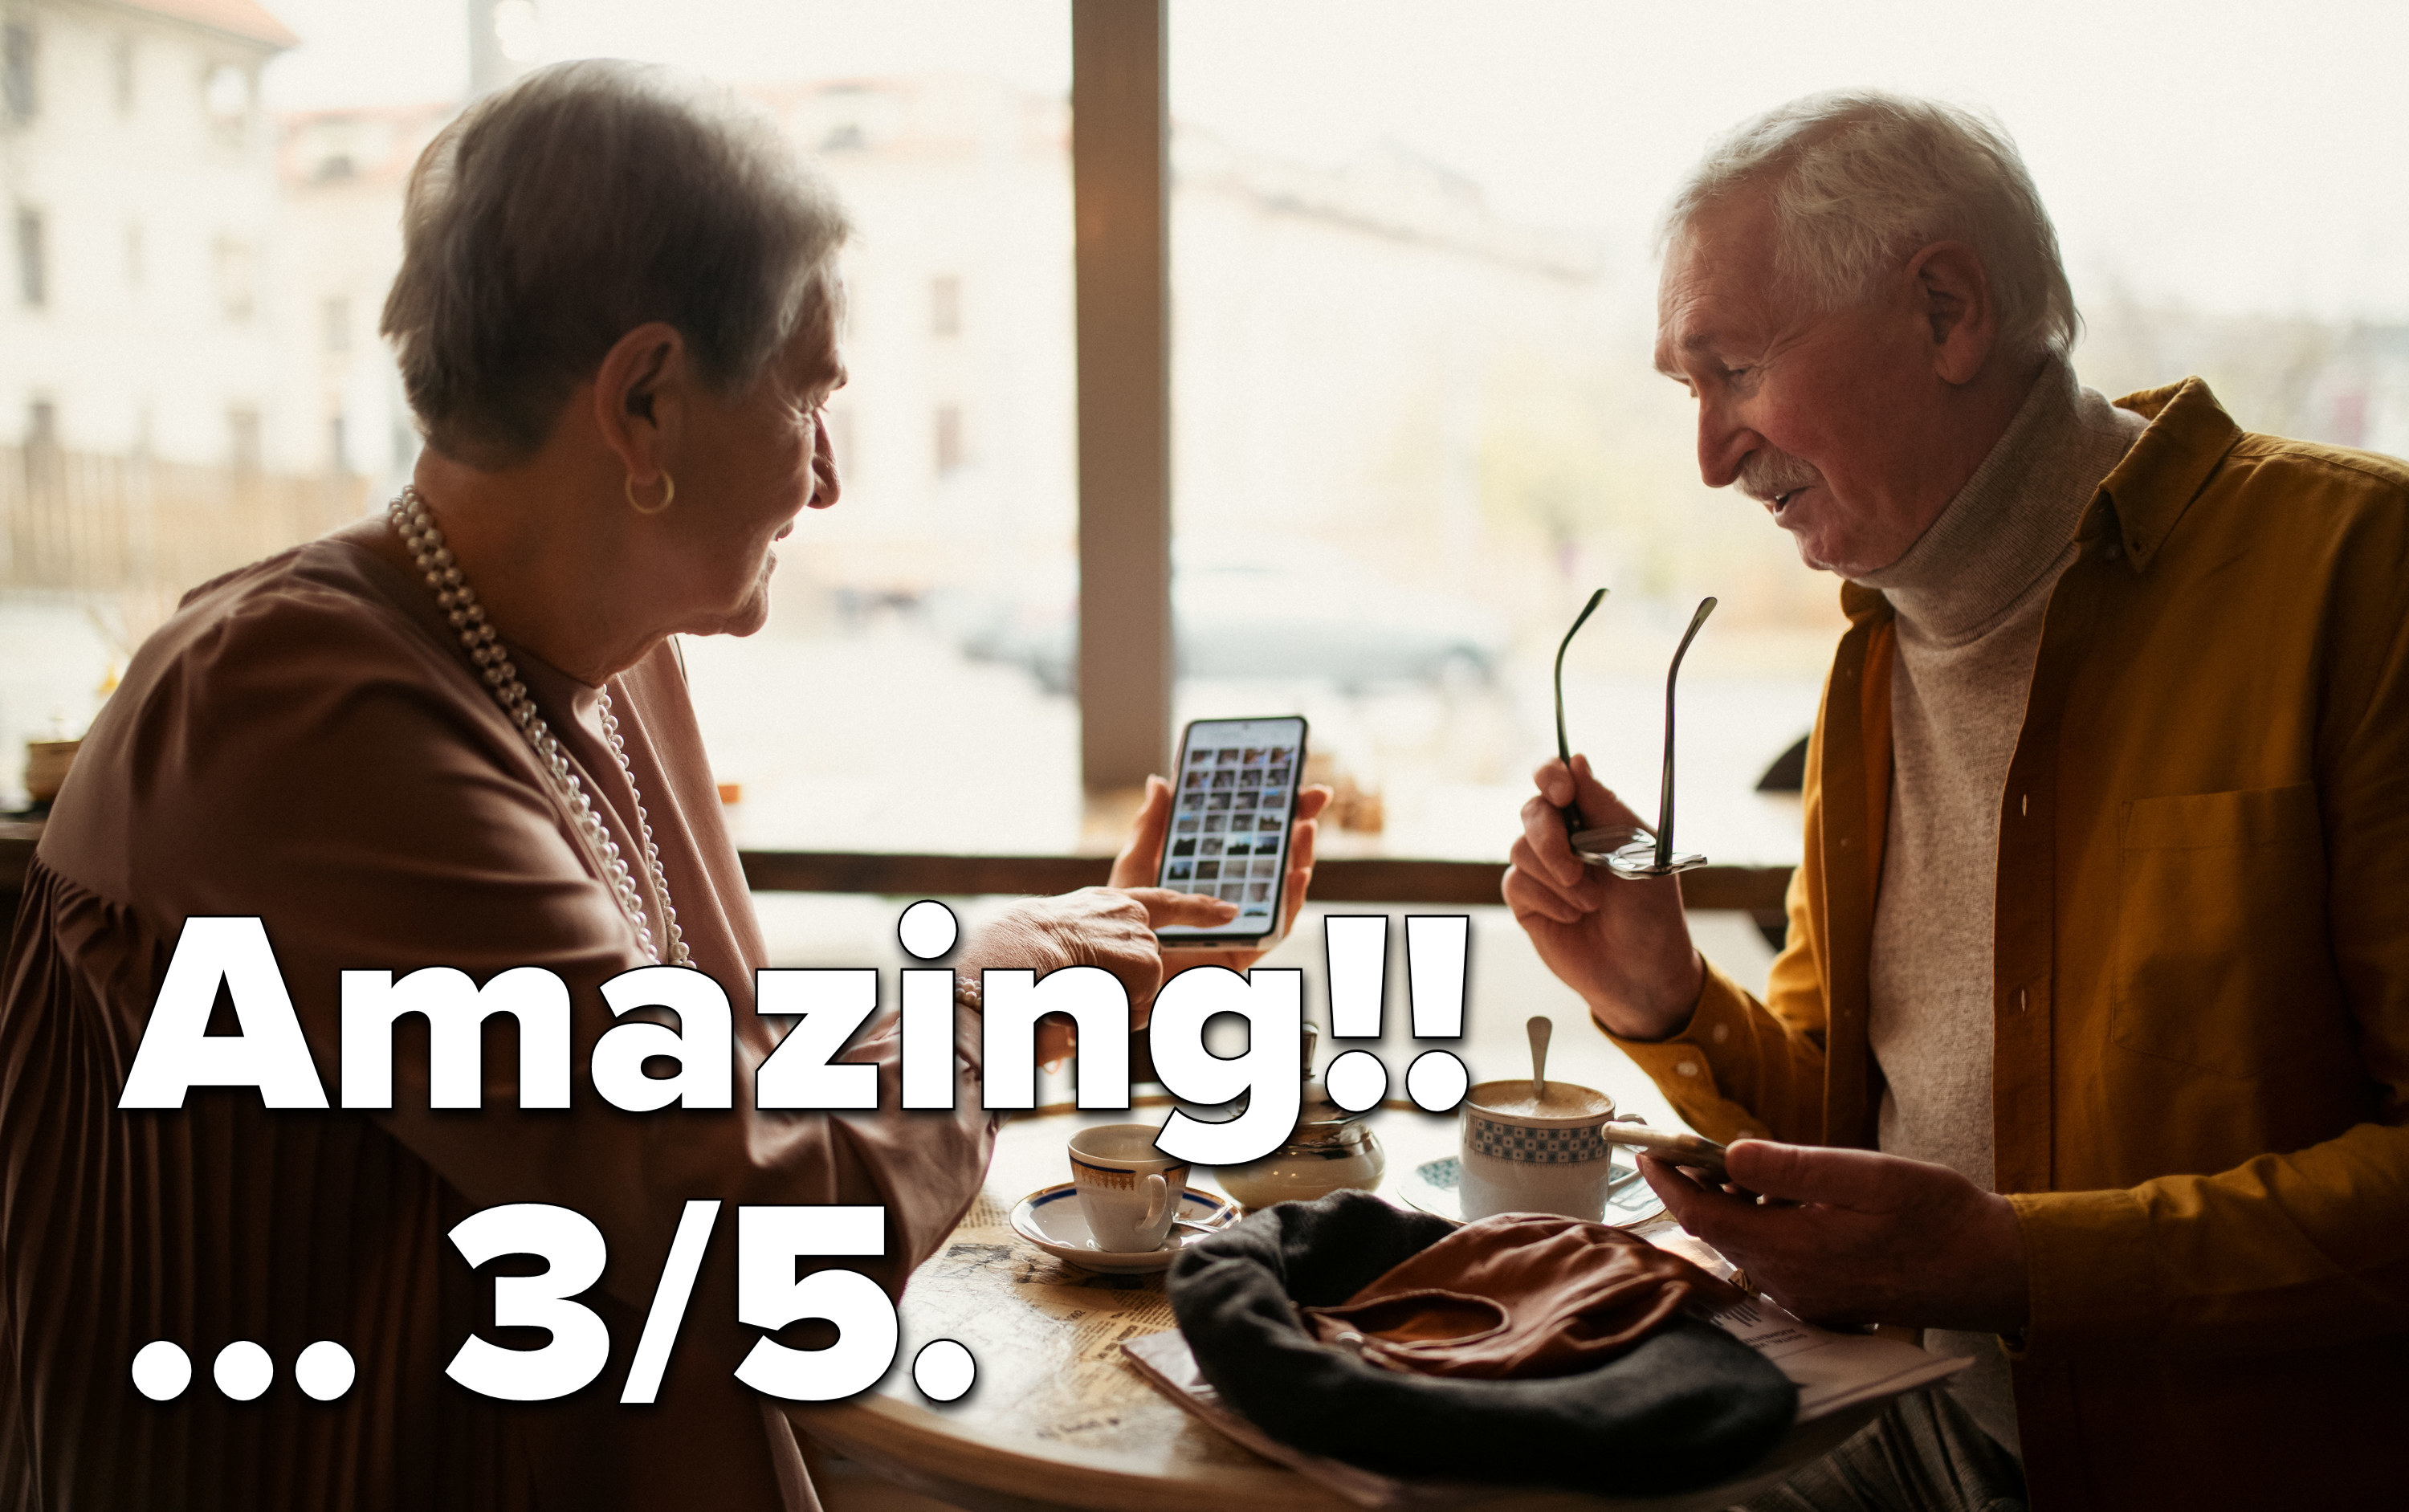 Older people on their phone in a cafe saying &quot;Amazing!! 3/5&quot;